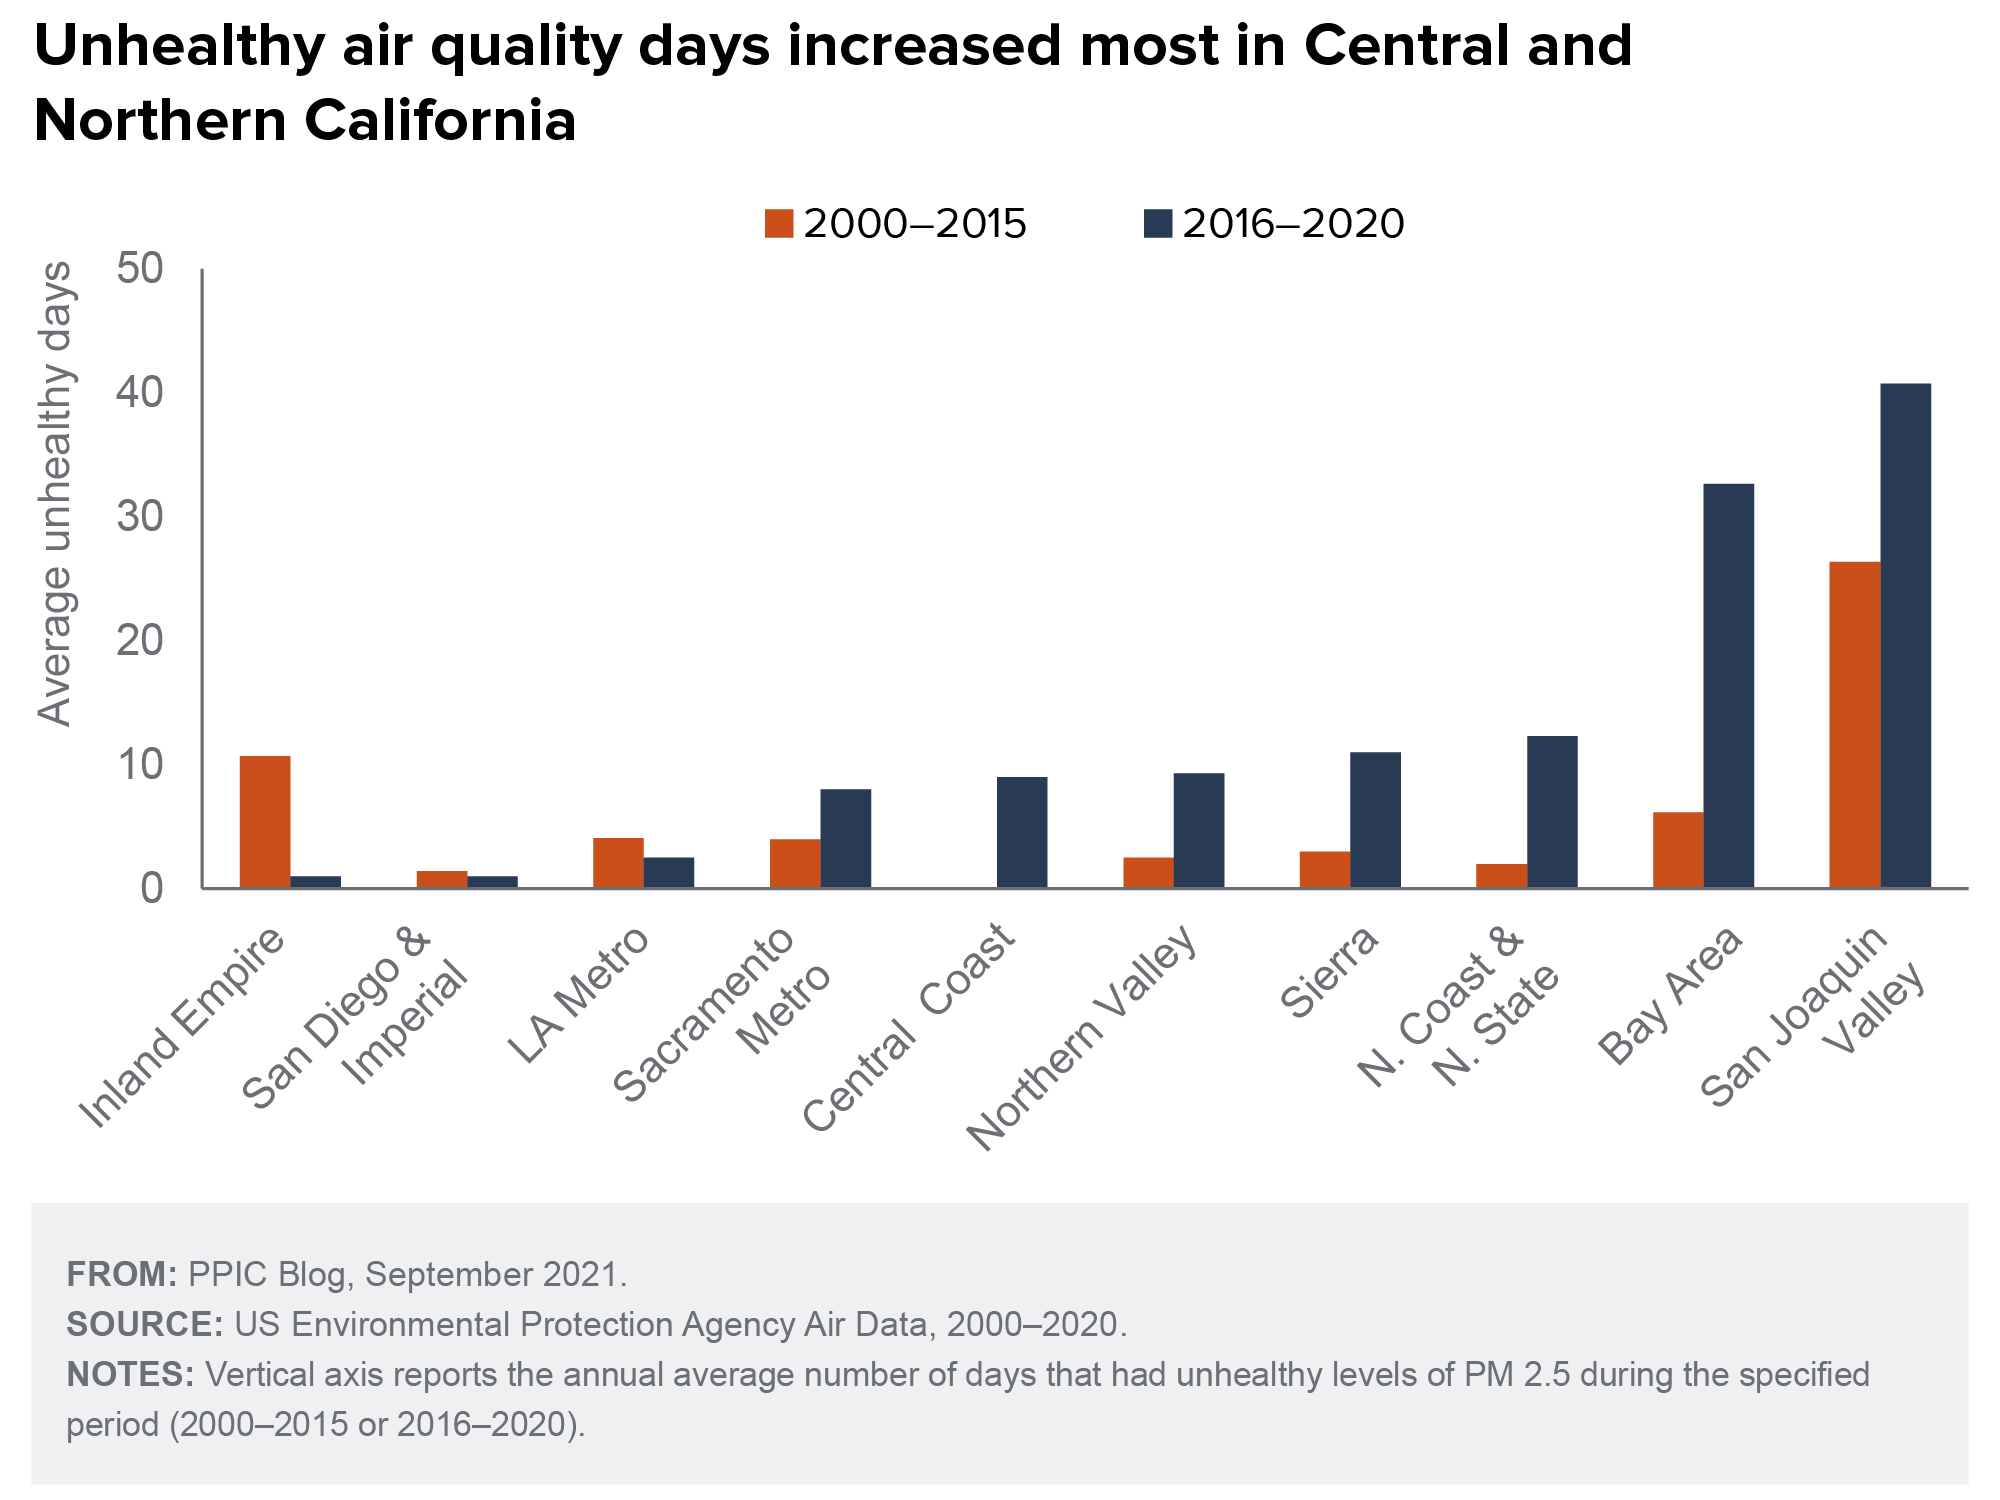 figure - Unhealthy air quality days increased in Central and Northern California